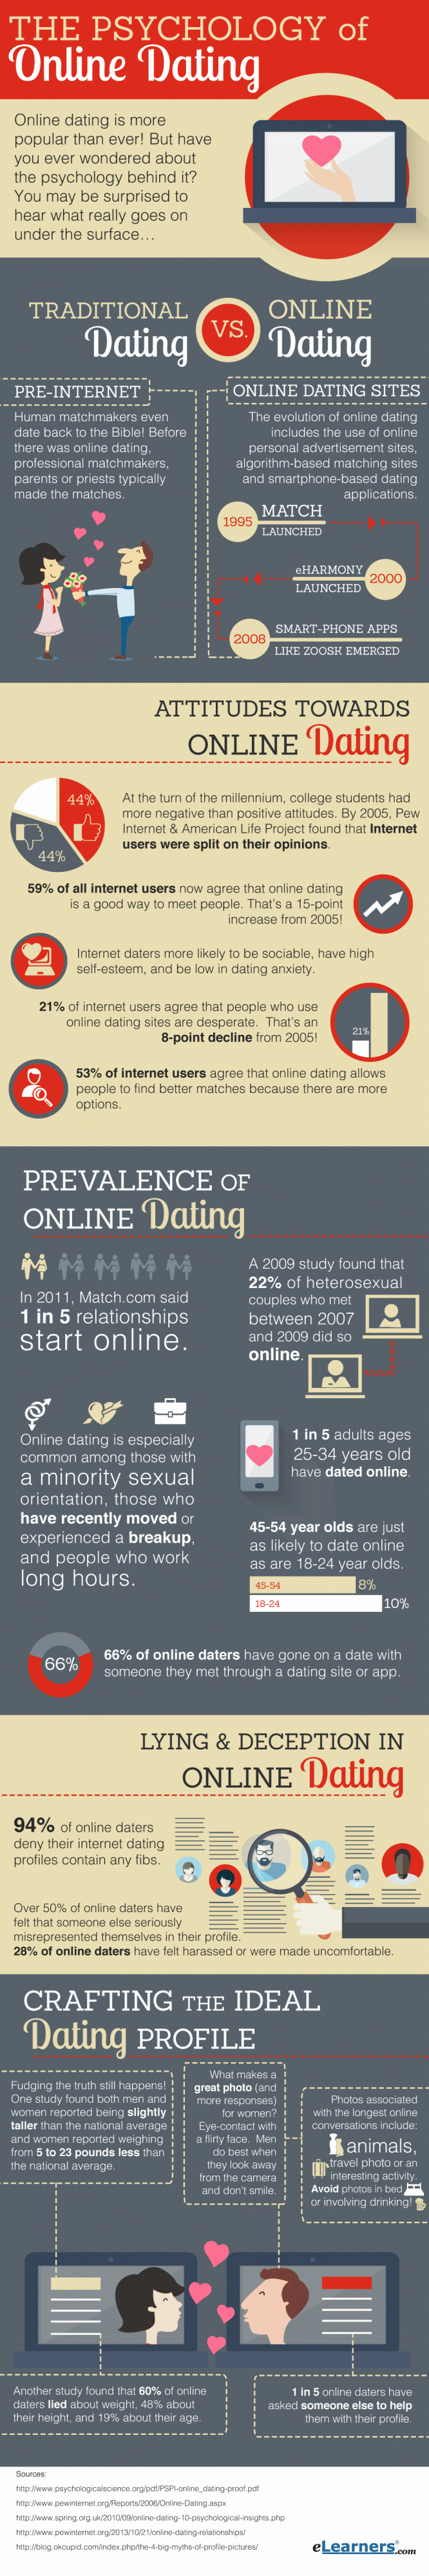 what are the effects of online dating